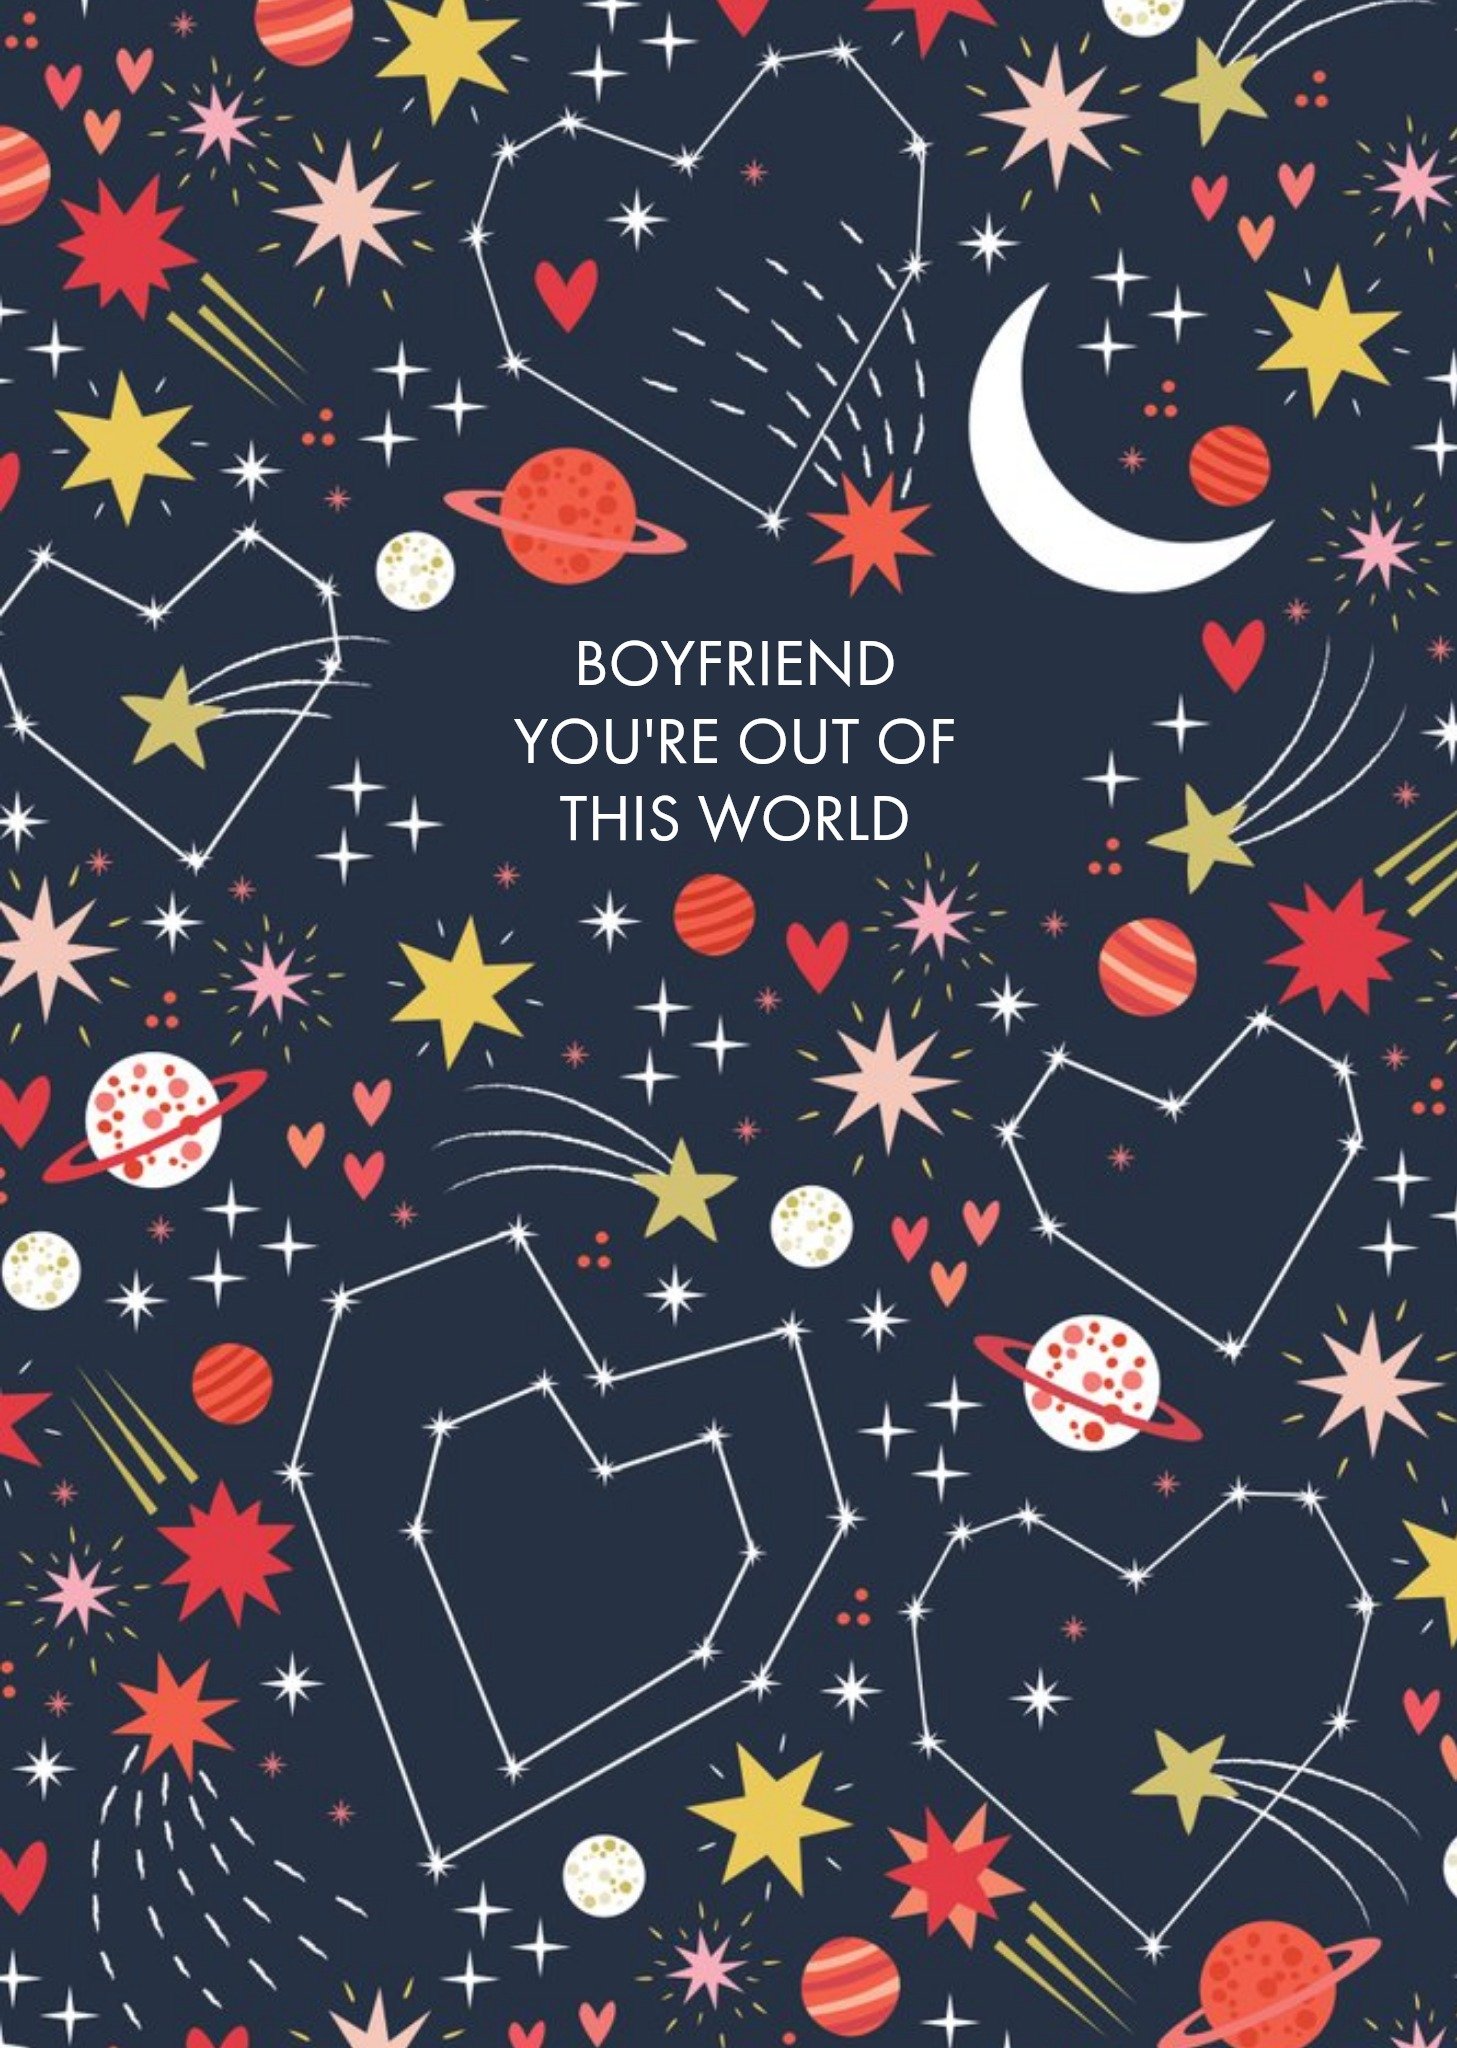 Moonpig Colourful Cosmos You're Out Of This World Boyfriend Valentine's Card Ecard